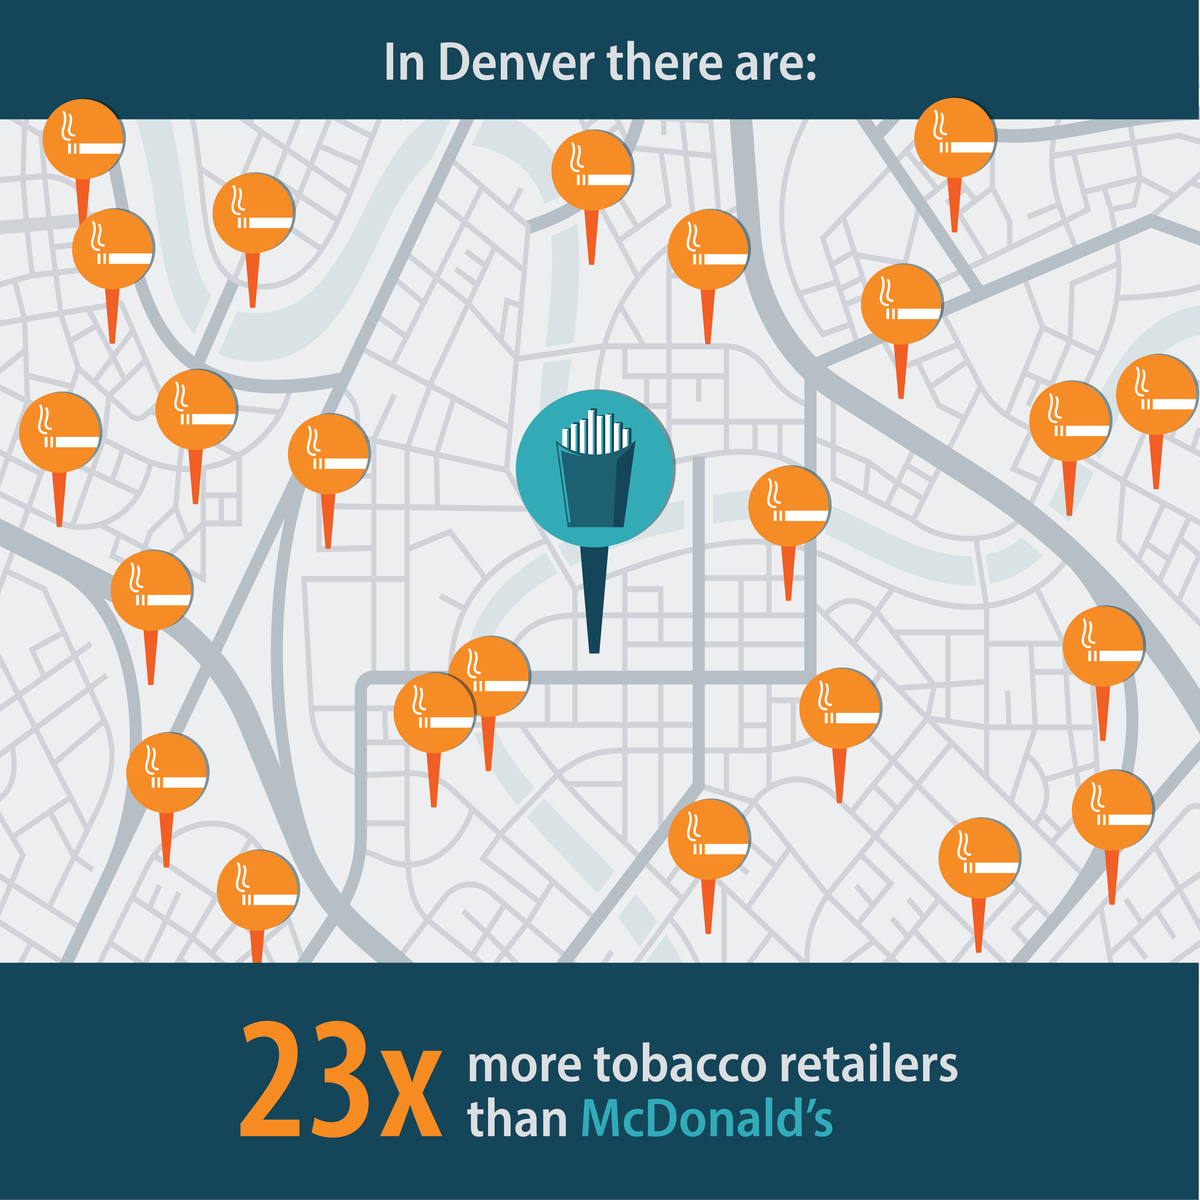 In Denver there are: 23 times more tobacco retailers than McDonald's